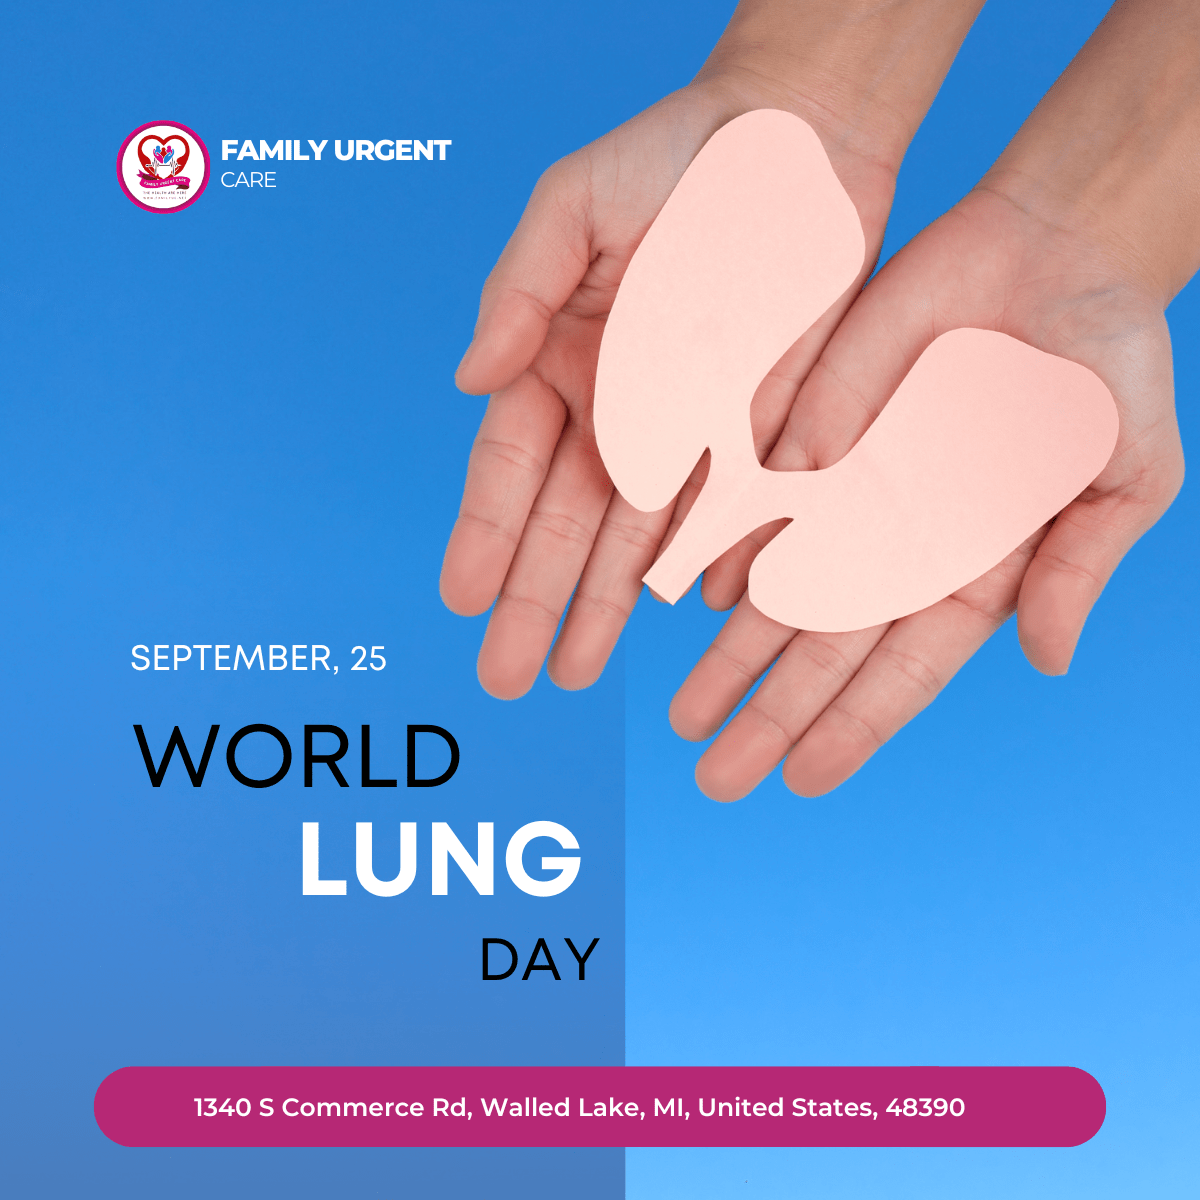 Family Urgent Care | It is more than just a clinic - World Lung Day